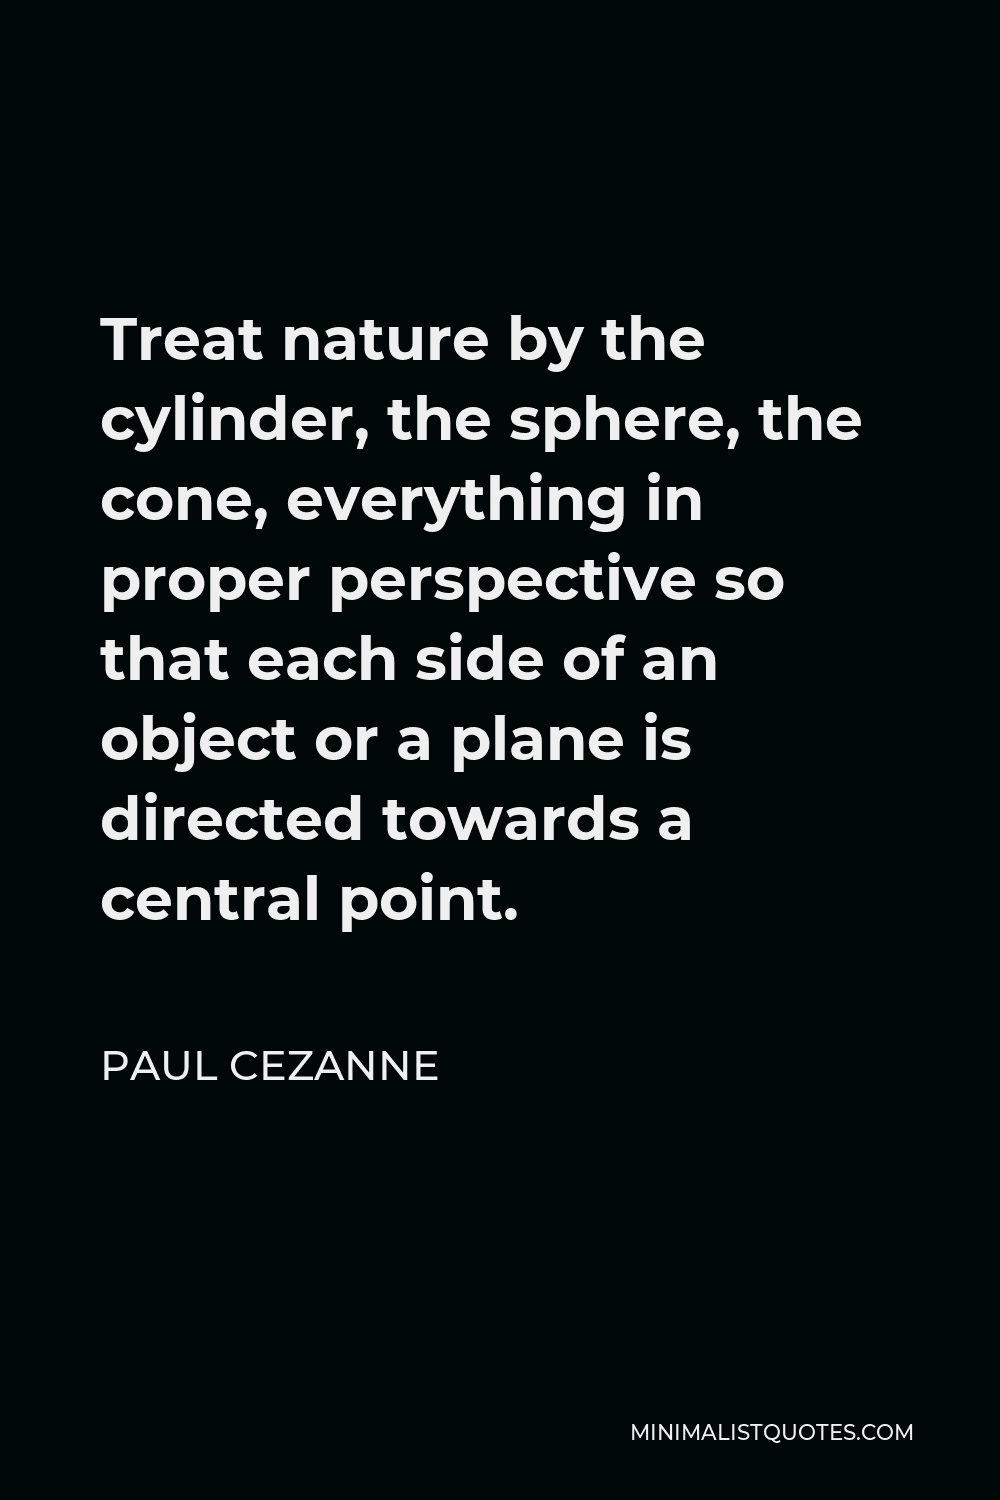 Paul Cezanne Quote - Treat nature by the cylinder, the sphere, the cone, everything in proper perspective so that each side of an object or a plane is directed towards a central point.